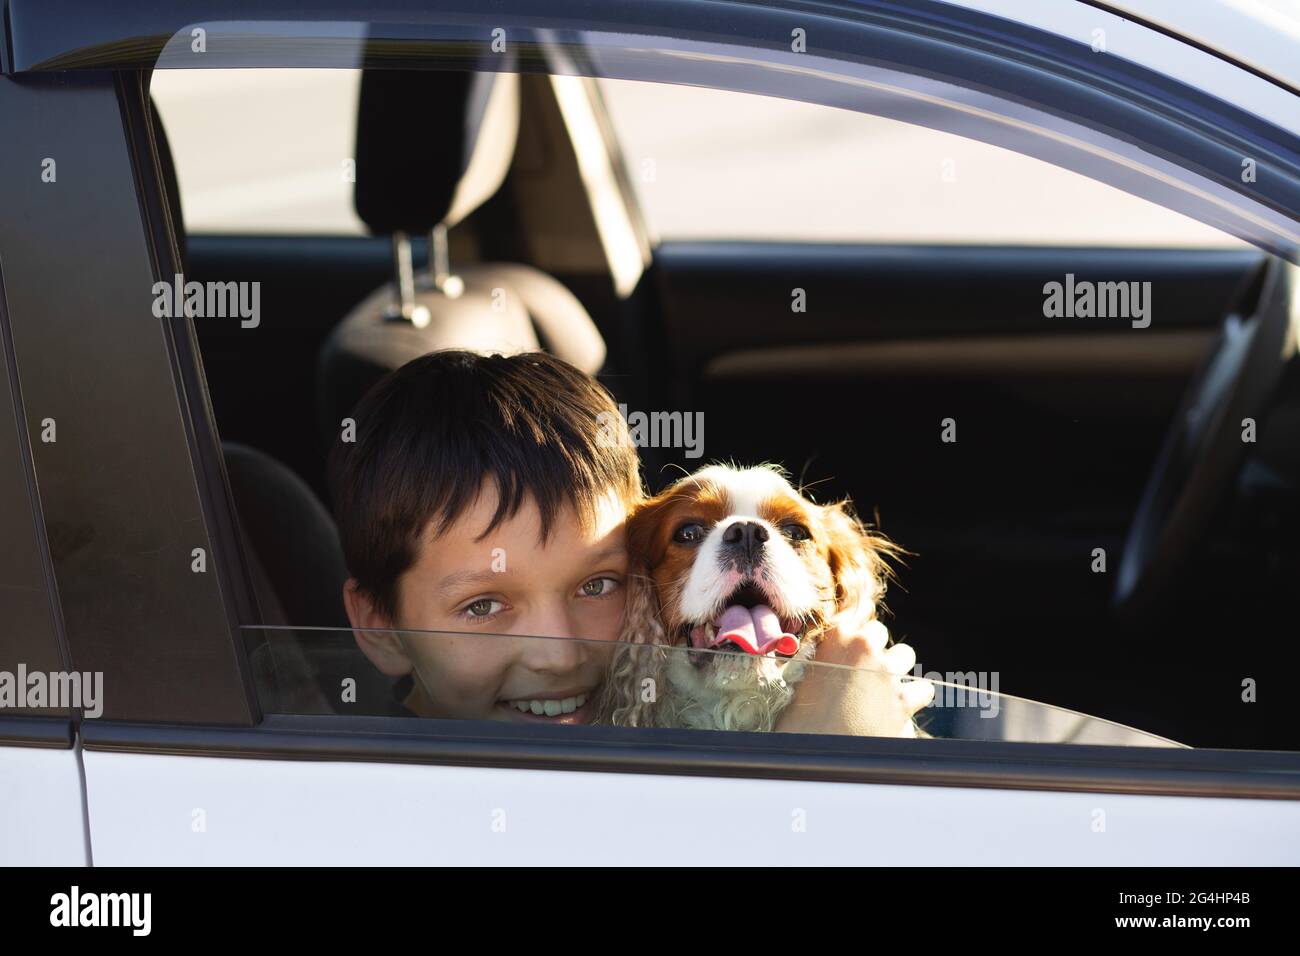 Teenager boy smiling looking through window of car with his dog cavalier king charles spaniel, dreaming to go on a trip Stock Photo